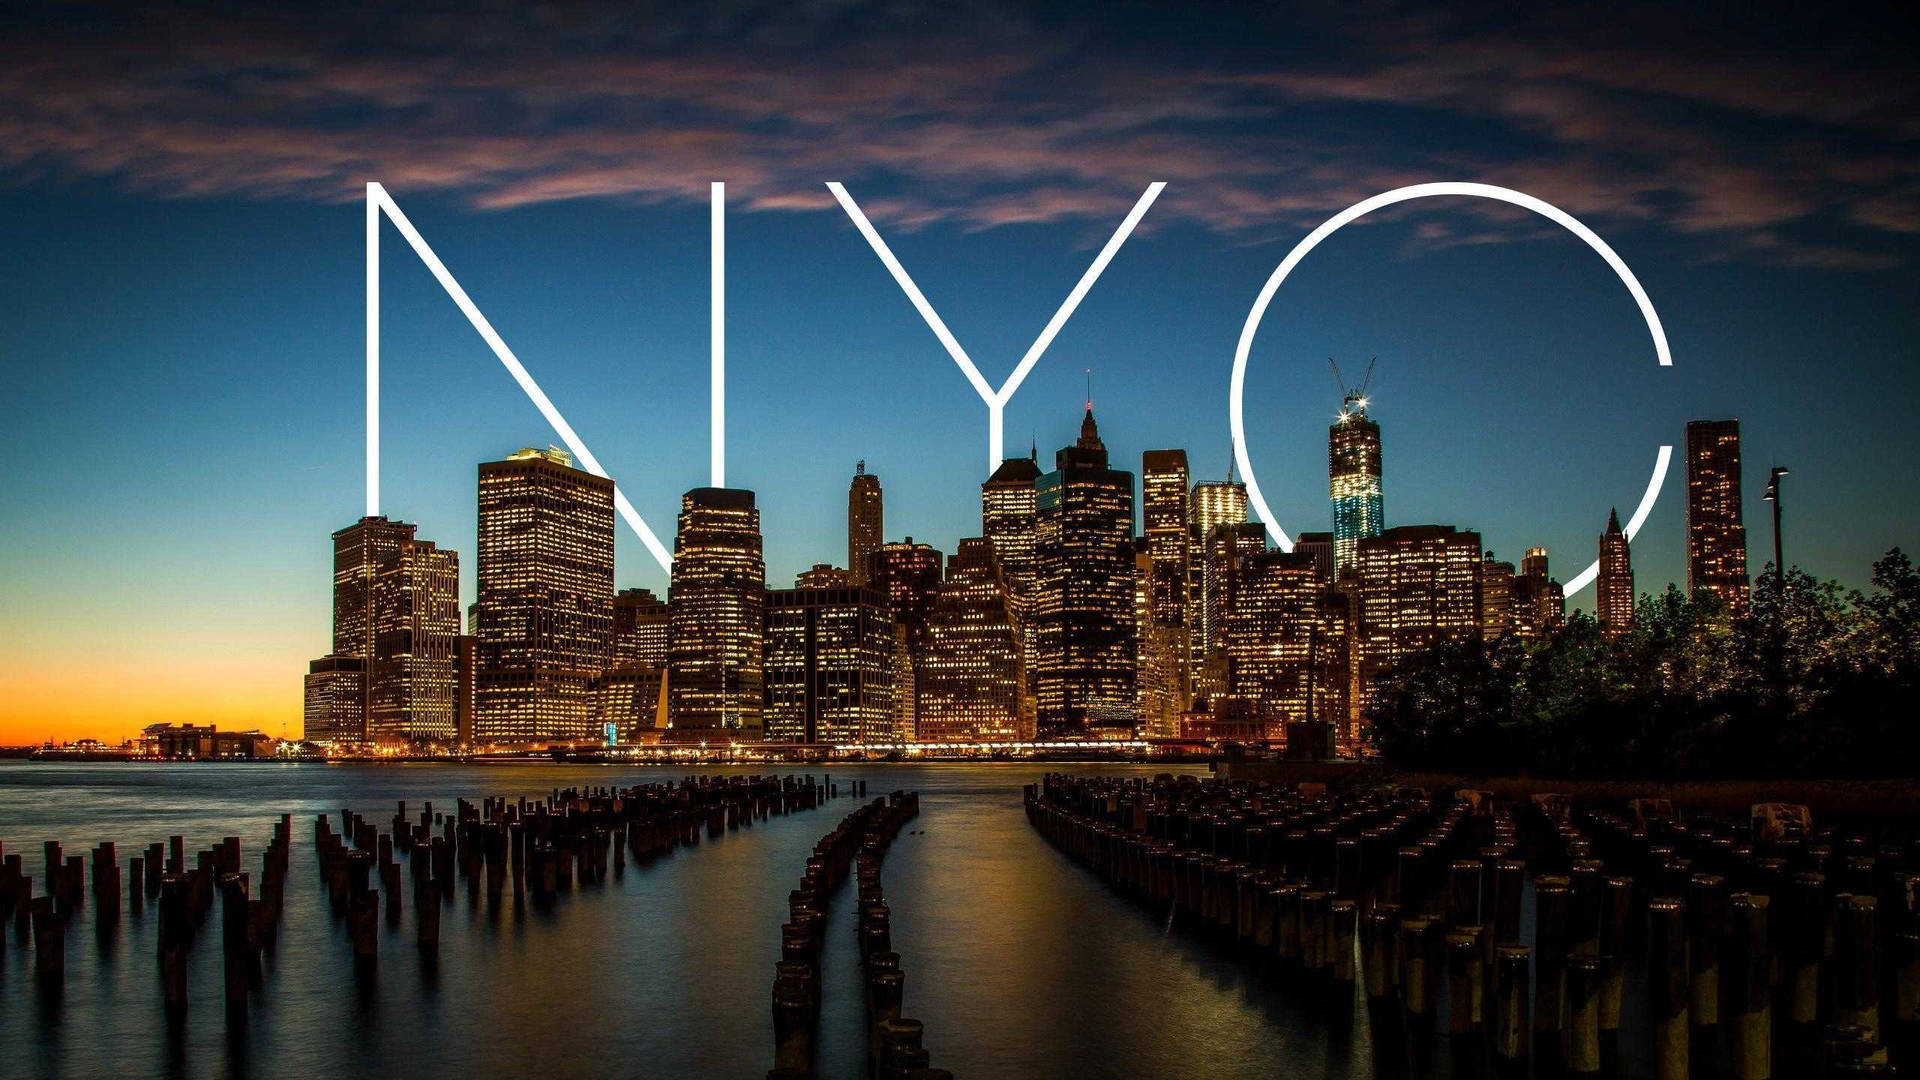 New York City with NYC text Wallpaper